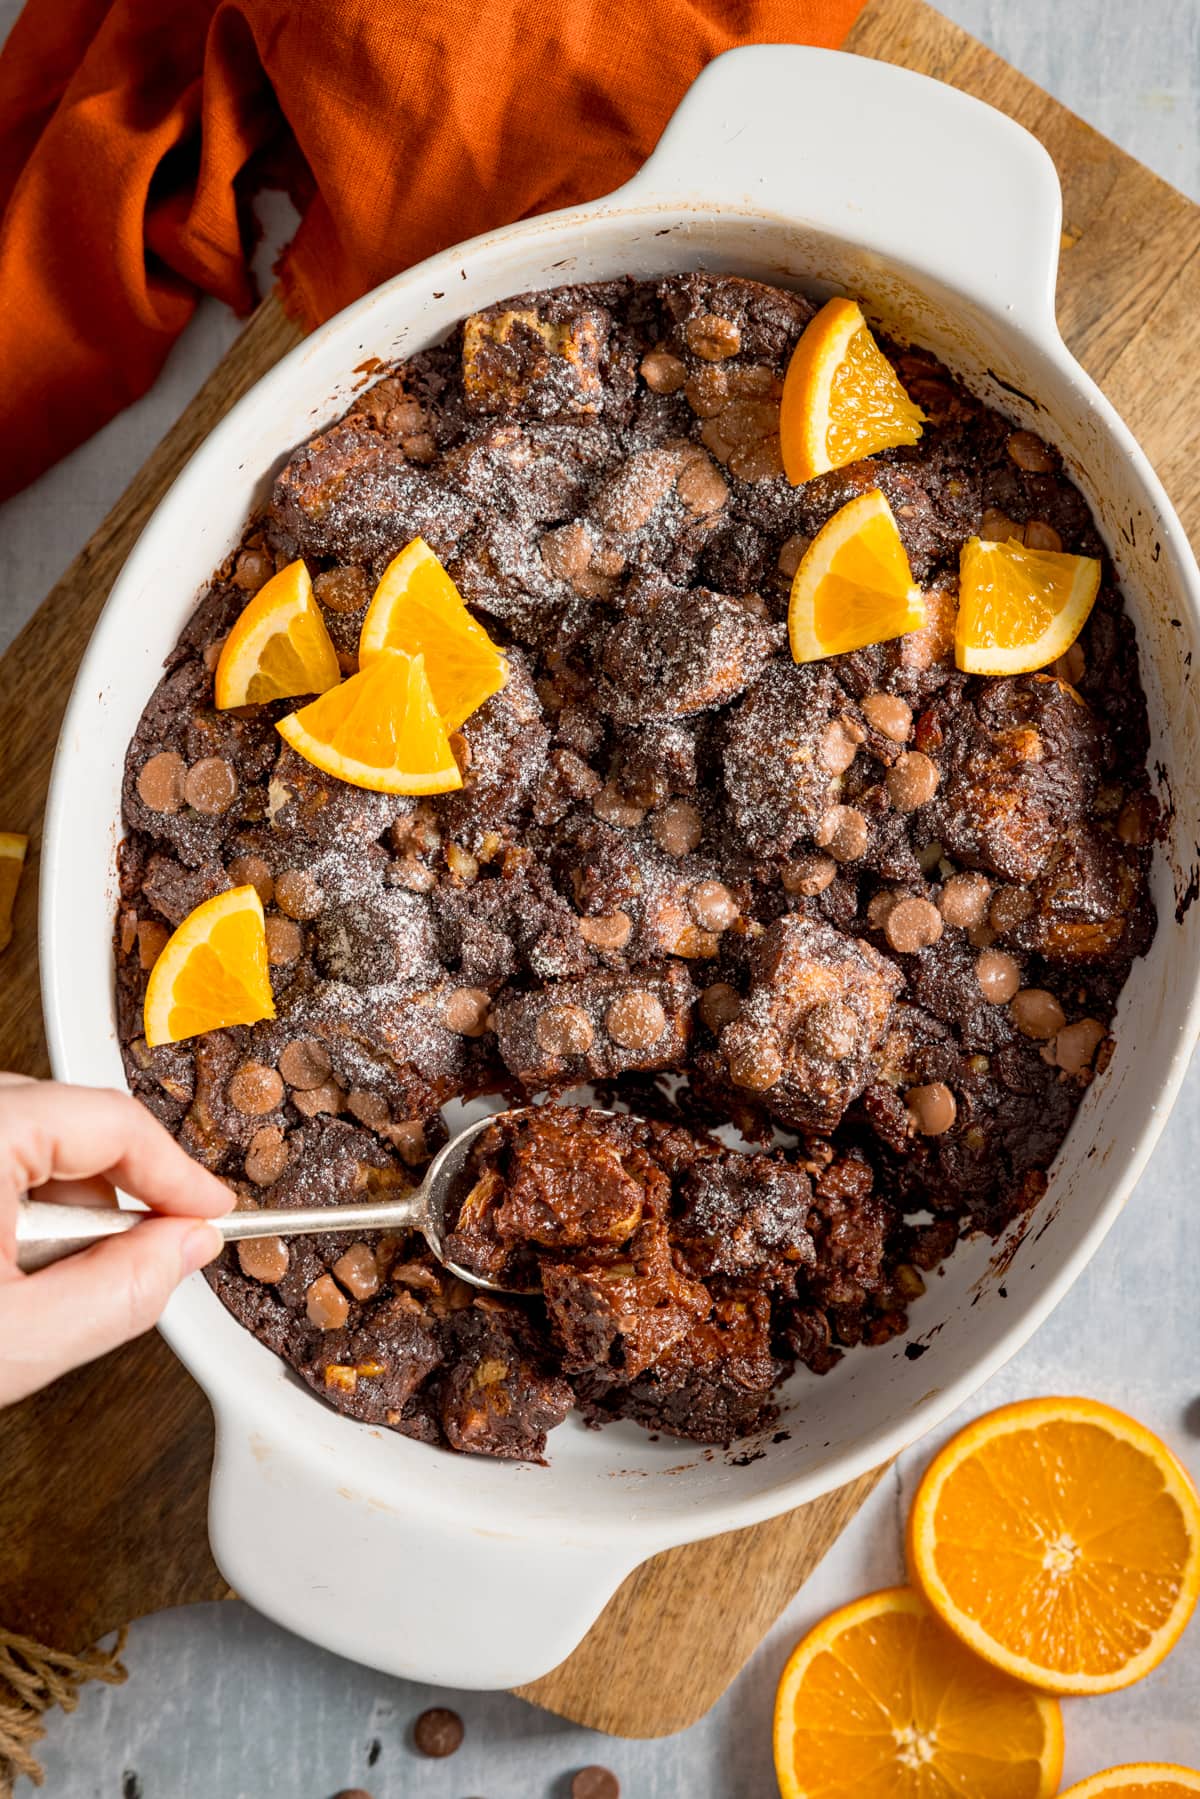 Overhead image of chocolate orange bread and butter pudding in a white dish, set on a wooden board. The pudding has orange slices on top and a spoonful is being taken. There are orange slices and an orange napkin around the dish.